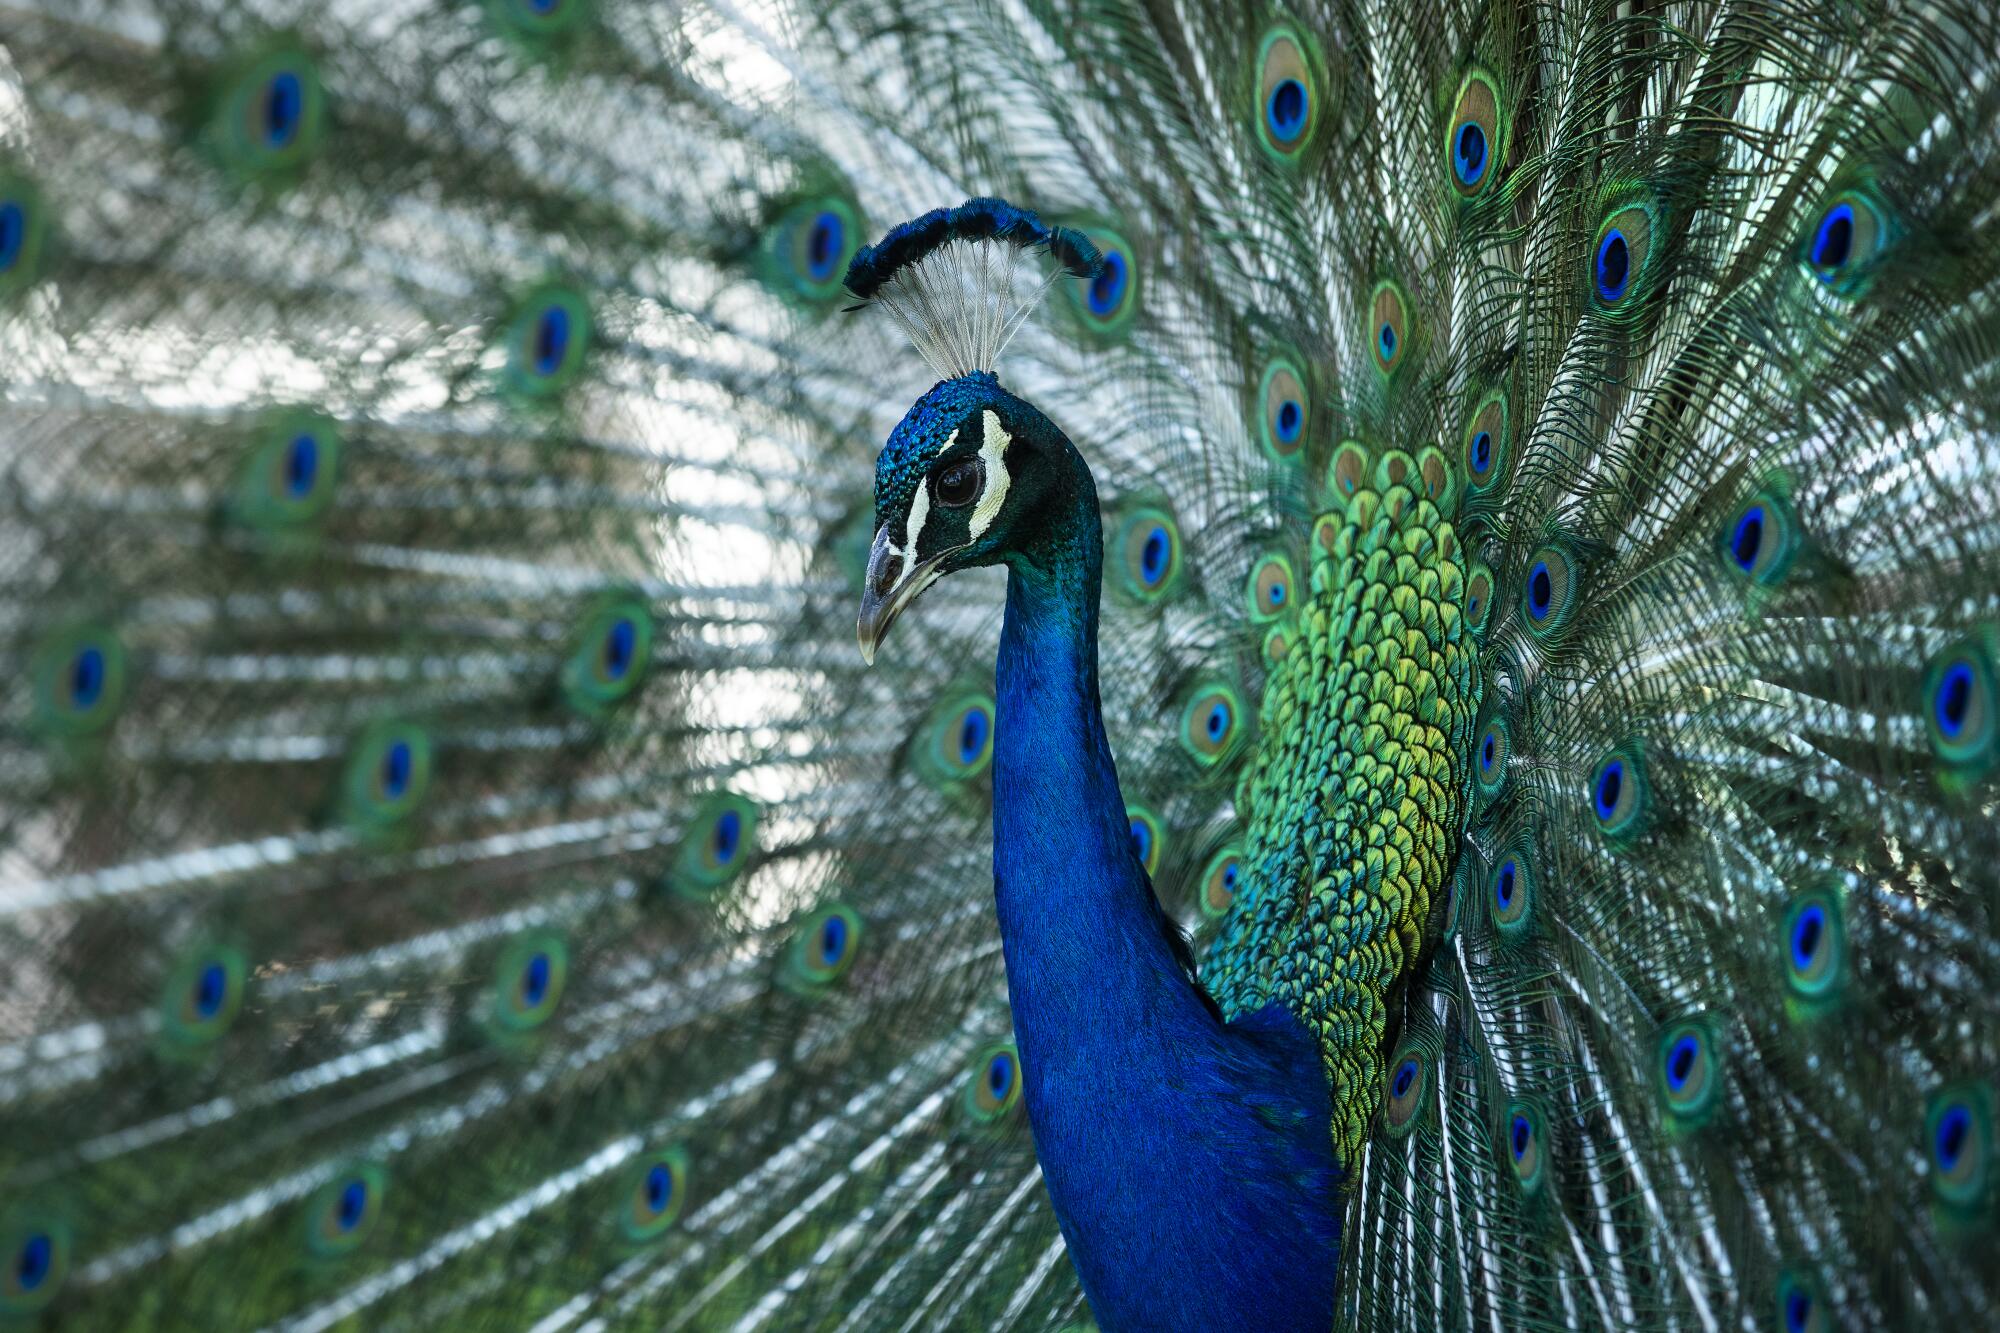 A bright blue peacock spreads out his ornate blue, green and brown tail feathers